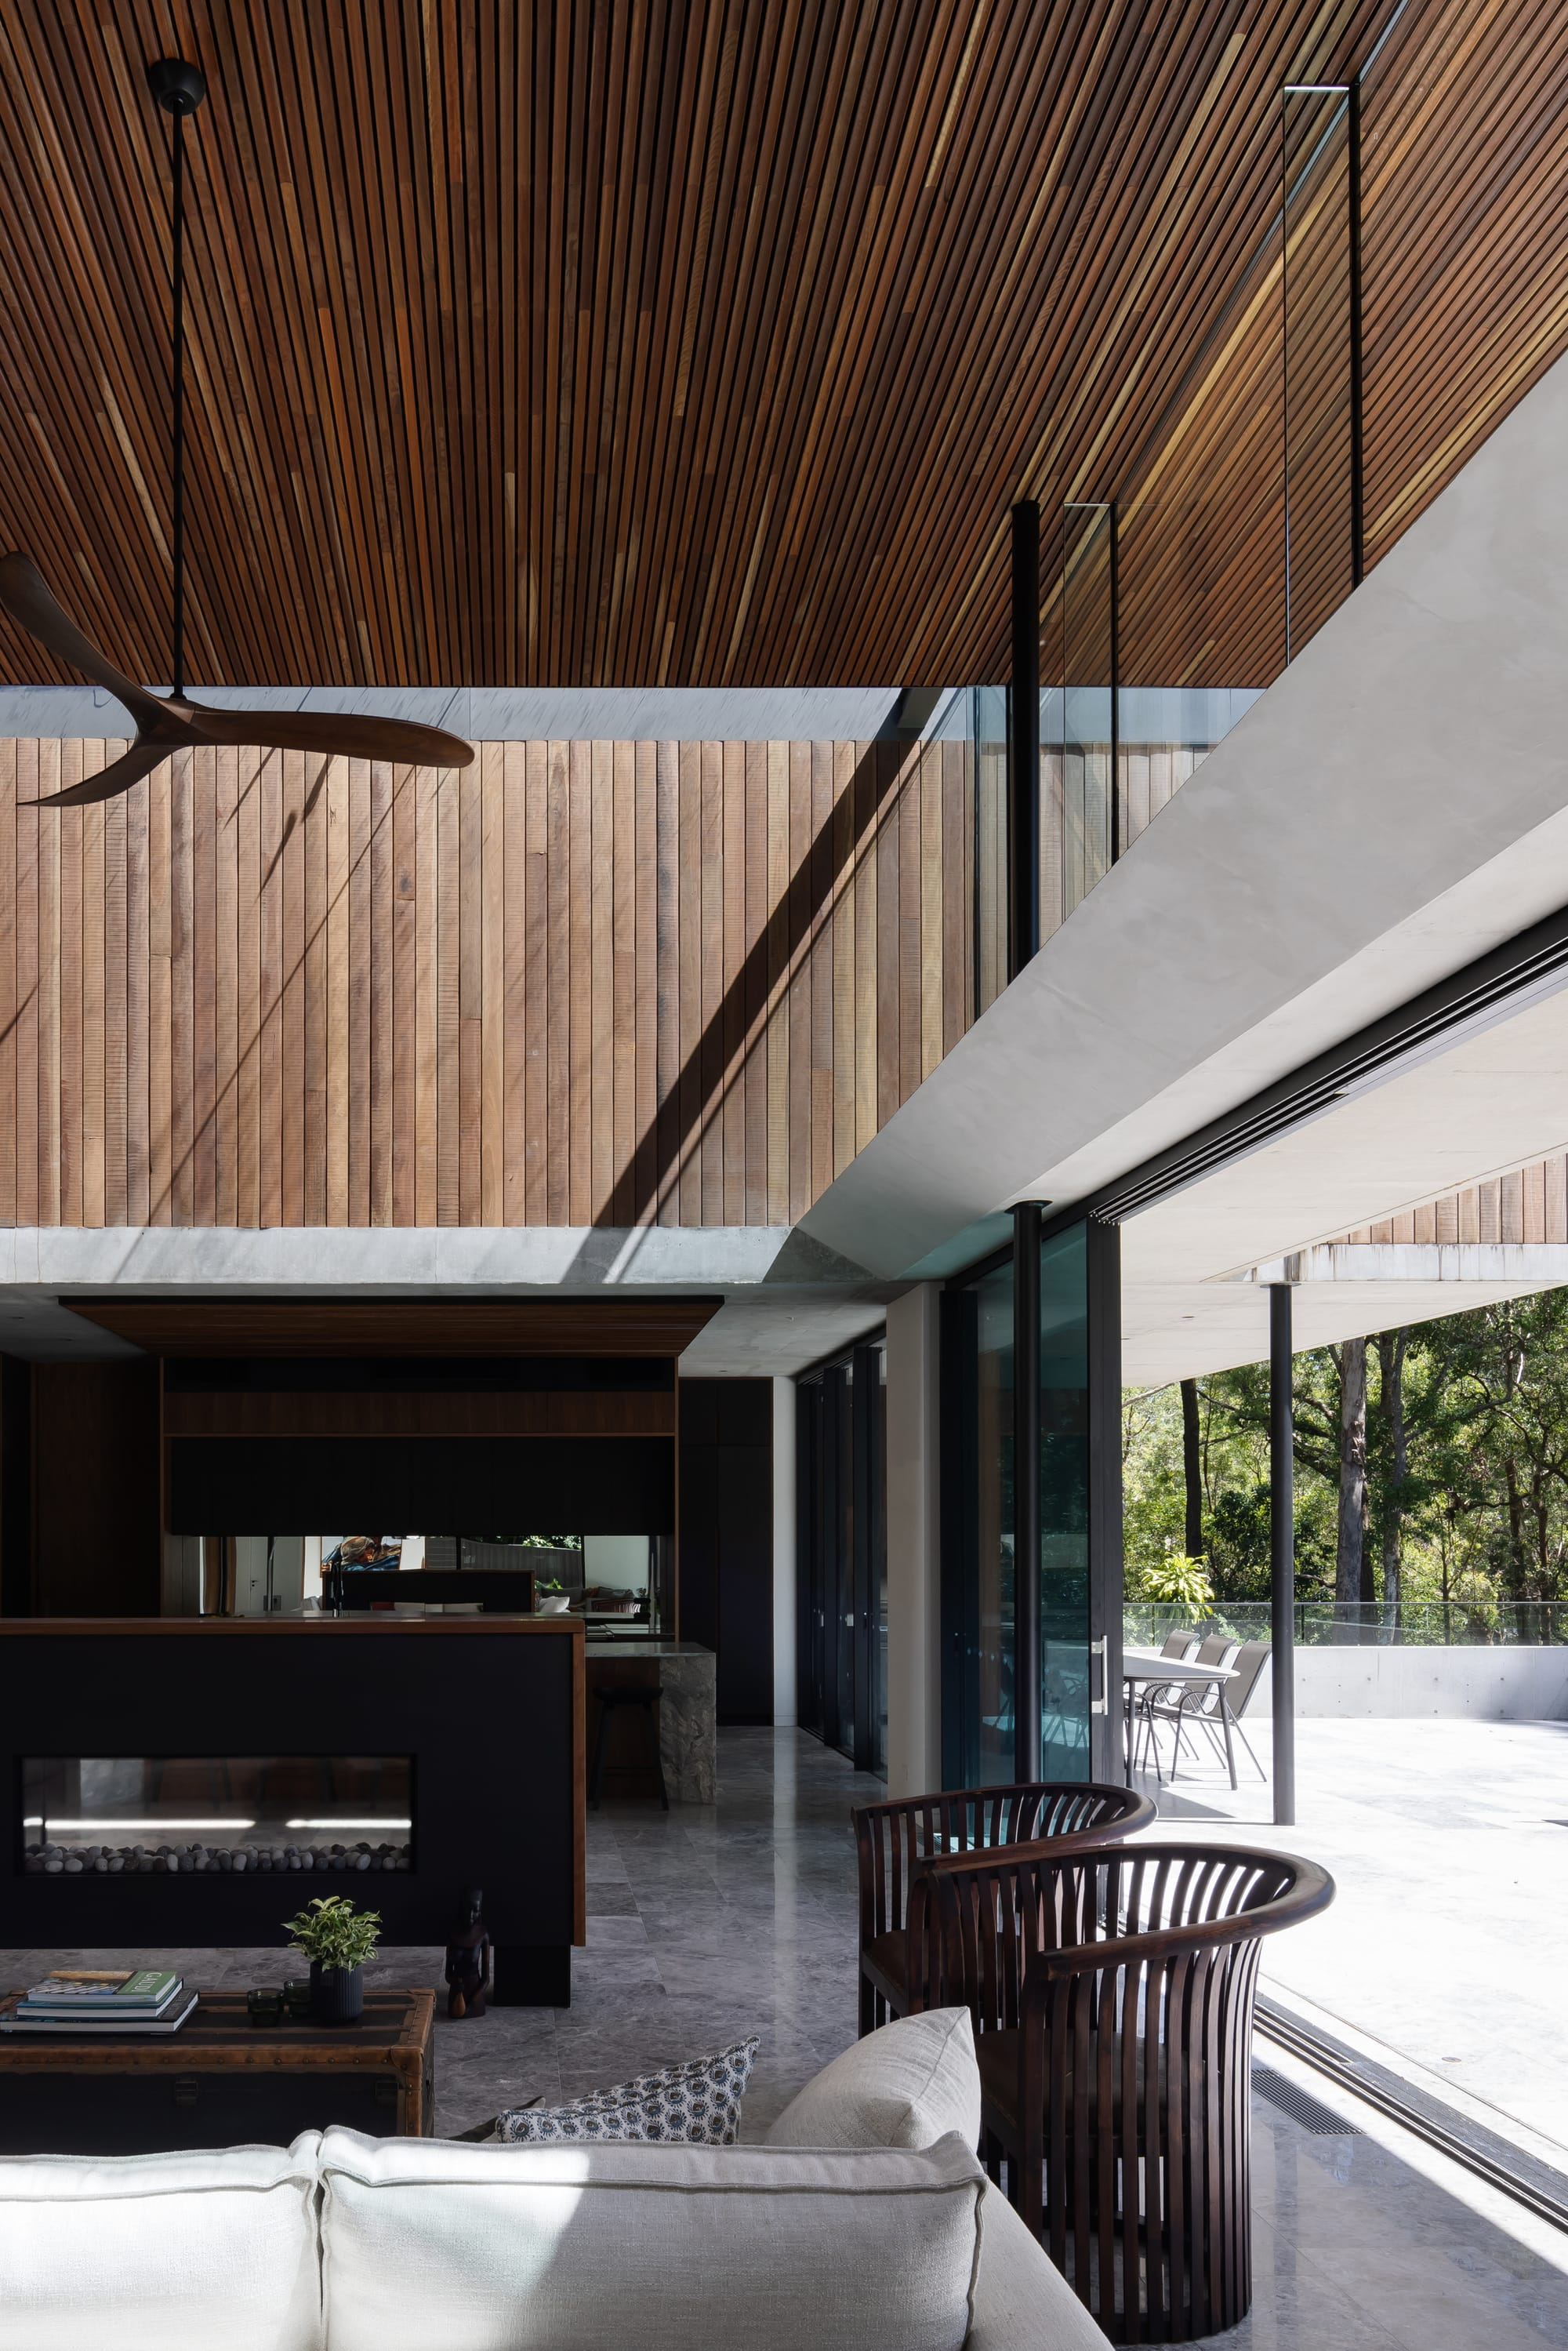 Mortlock Timbers Series: Fox Valley House. Photography by Simon Whitbread. Double storey interior living space with polished stone floors and timber clad walls and ceiling on second floor. Timber armchairs and white lounge in foreground.